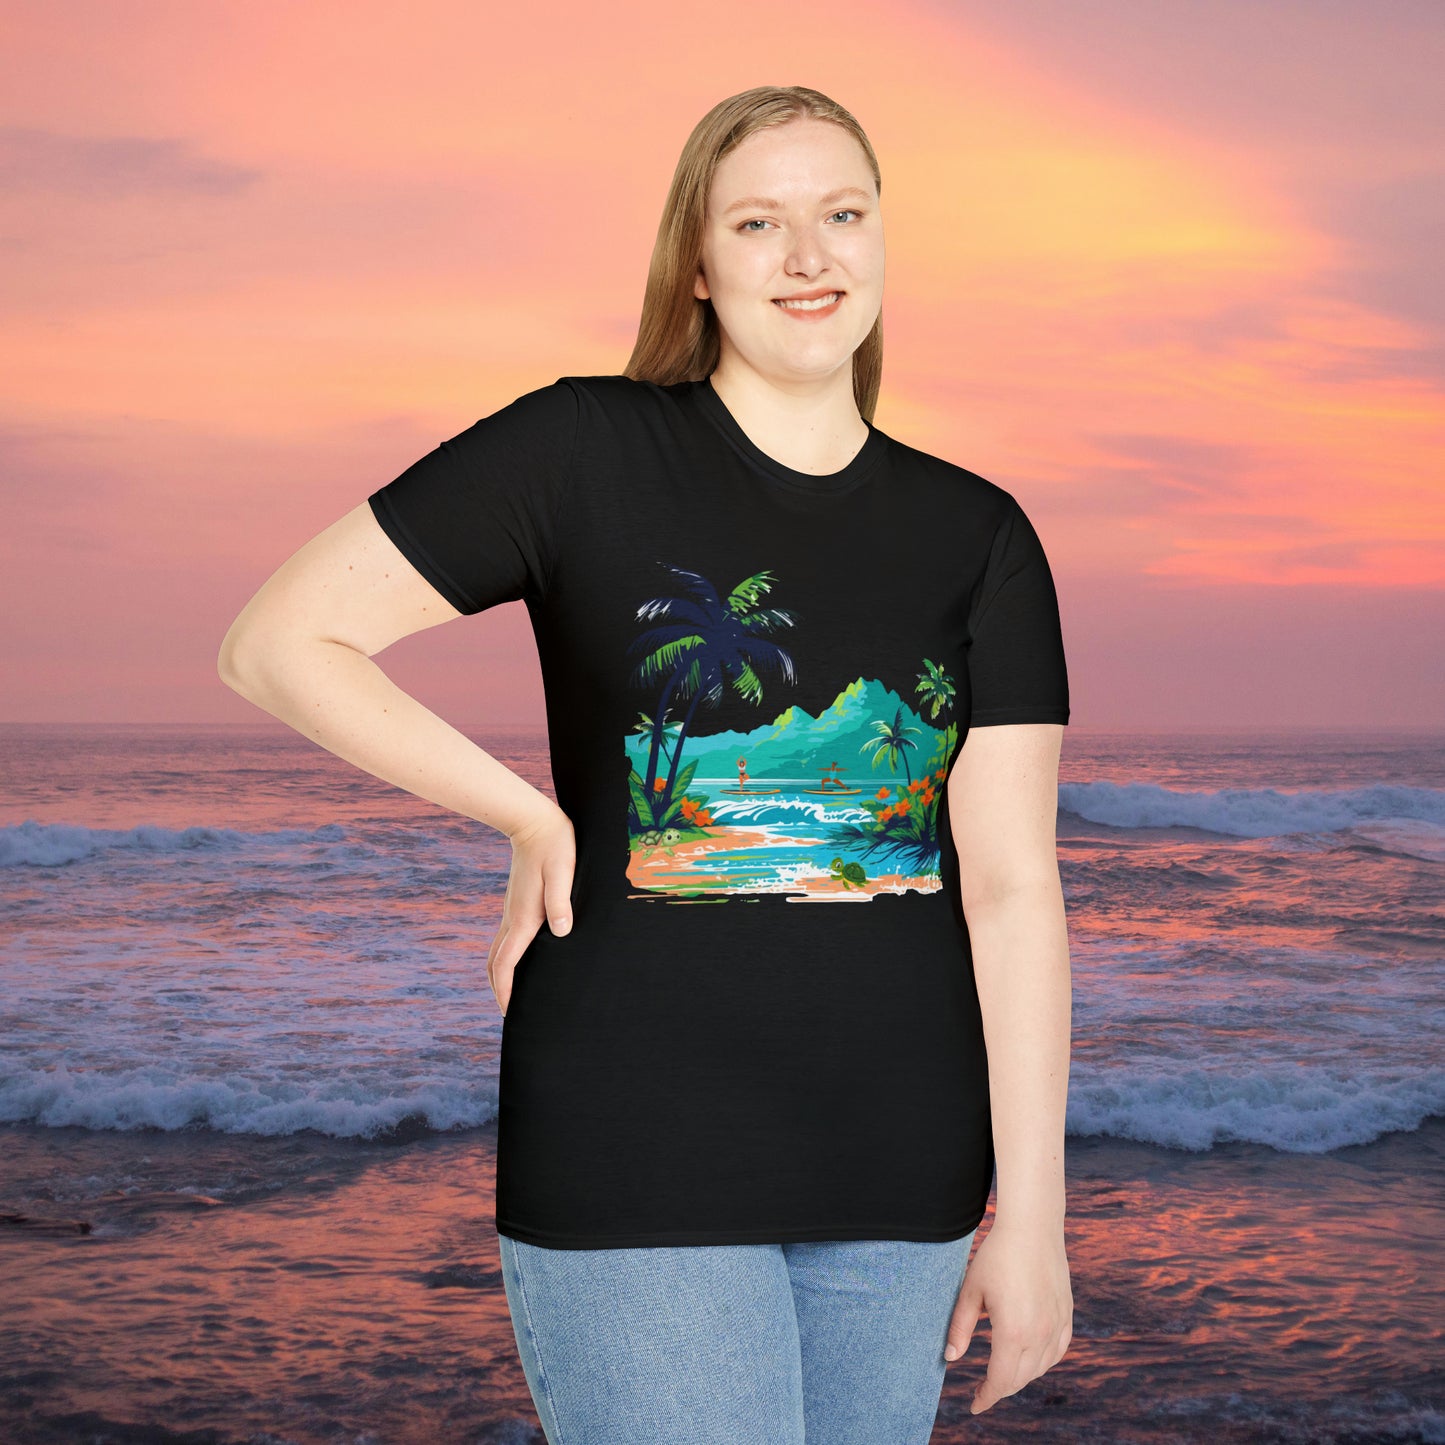 A peaceful paddle board yoga, anyone? With turtles, palm trees and yes the ocean and mountains. Enjoy! A Unisex Softstyle T-Shirt.